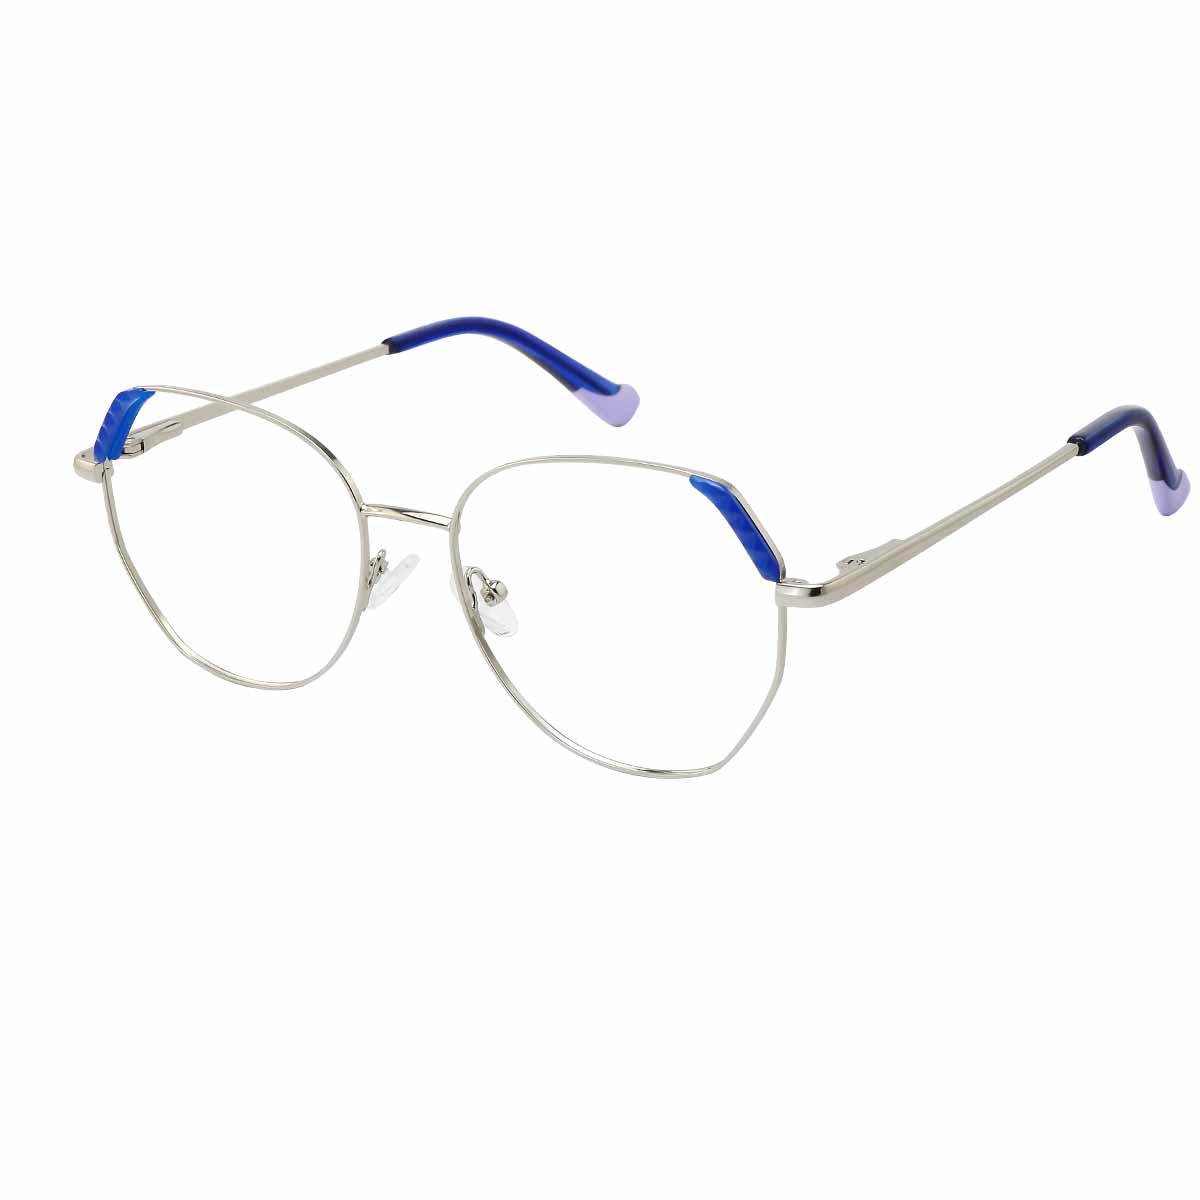 Corinna - Oval Silver/Blue Reading Glasses for Women